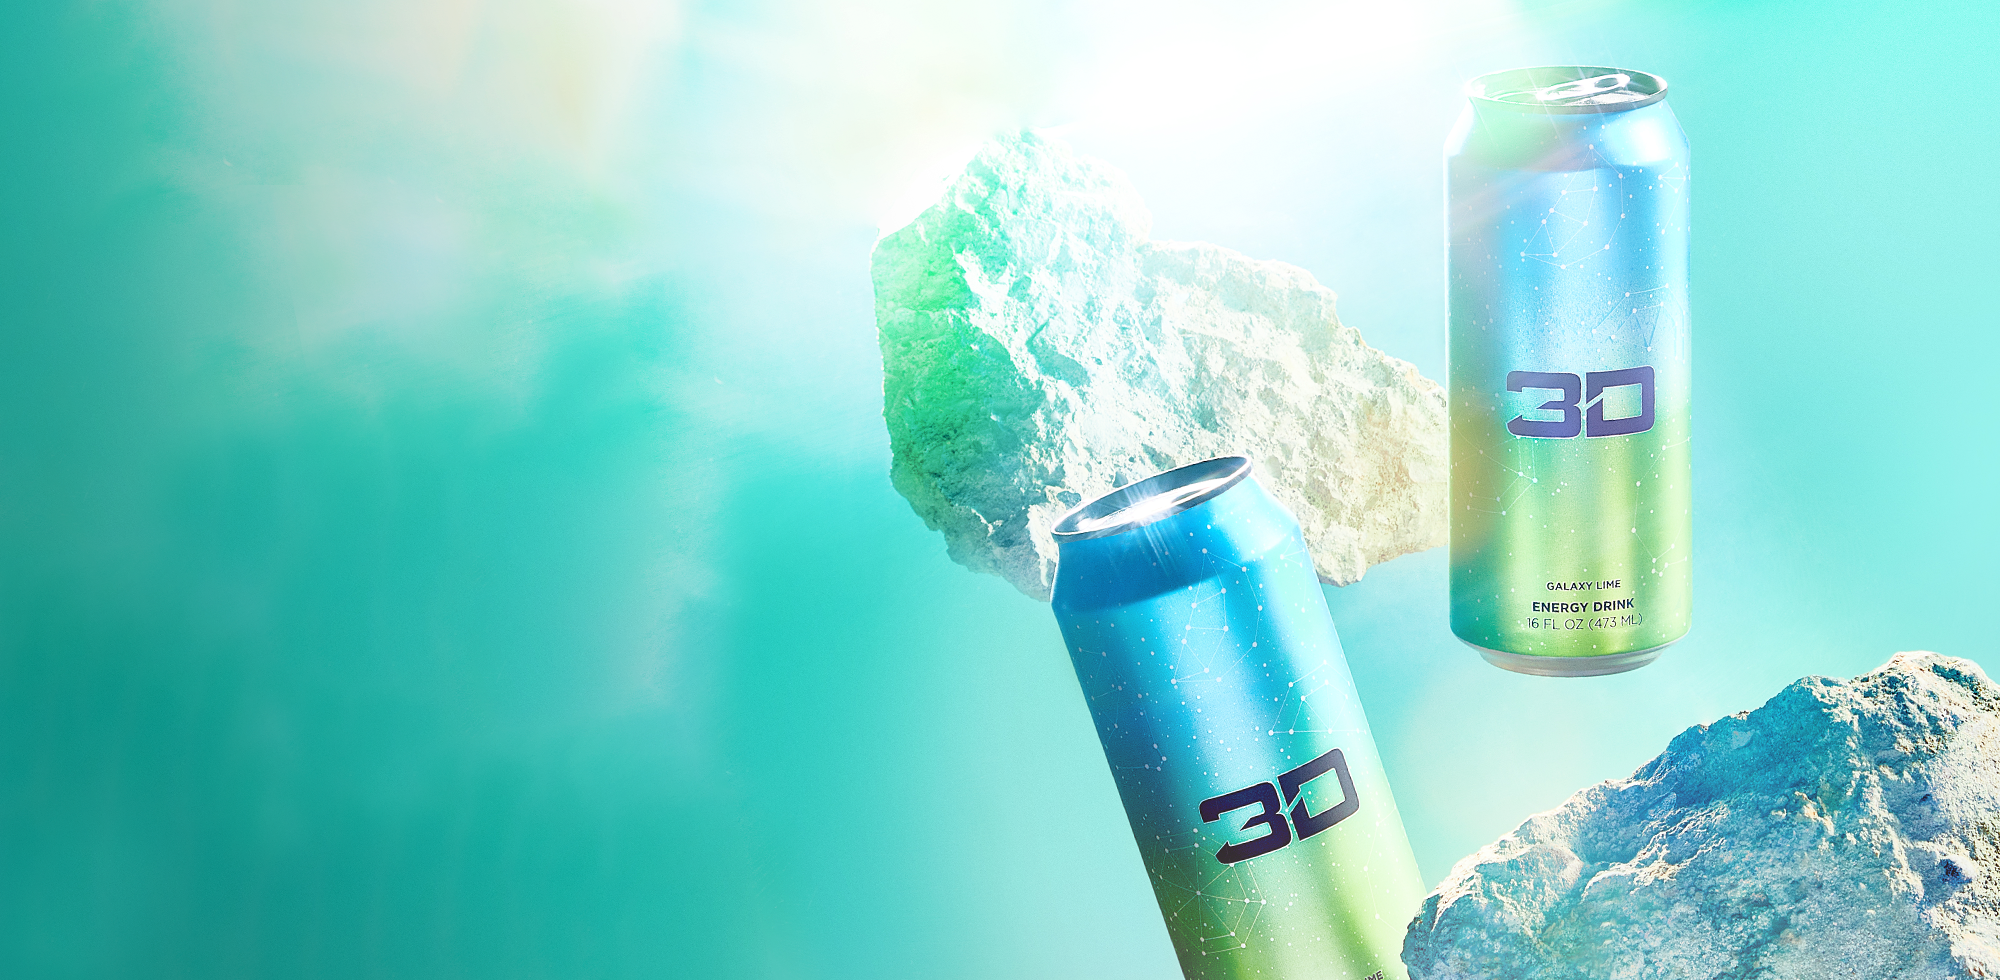  Two cans of '3D' energy drink in a 'Galaxy Lime' flavor, with one can upright and the other tilted, against a backdrop of aqua blue with rock formations, evoking a fresh and energetic feel.